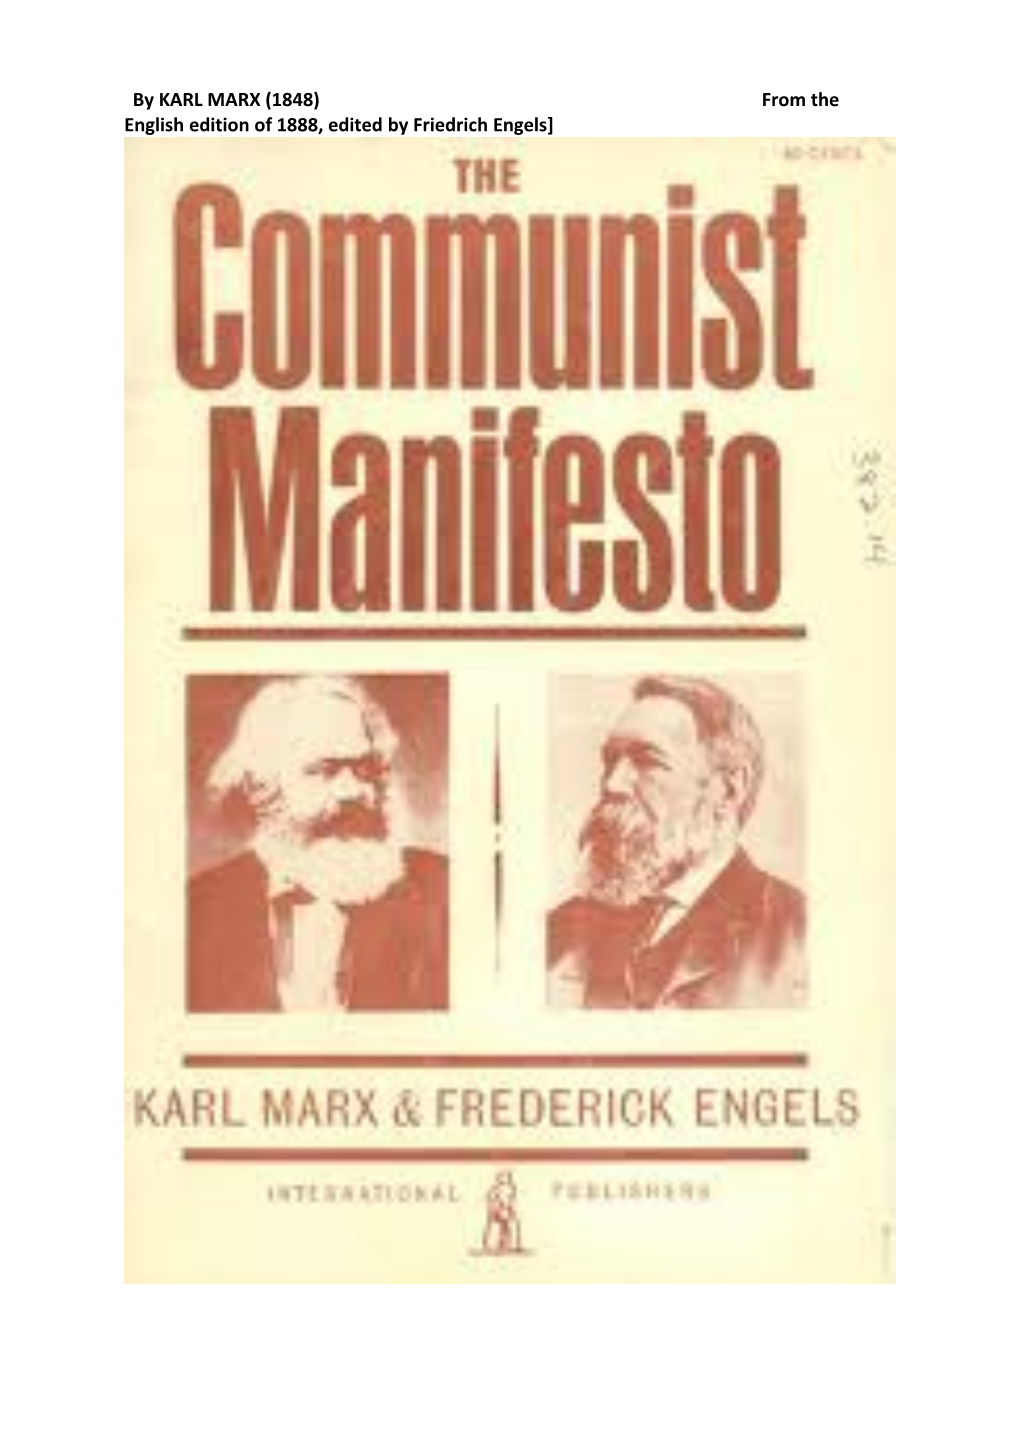 By KARL MARX (1848) from the English Edition of 1888, Edited by Friedrich Engels